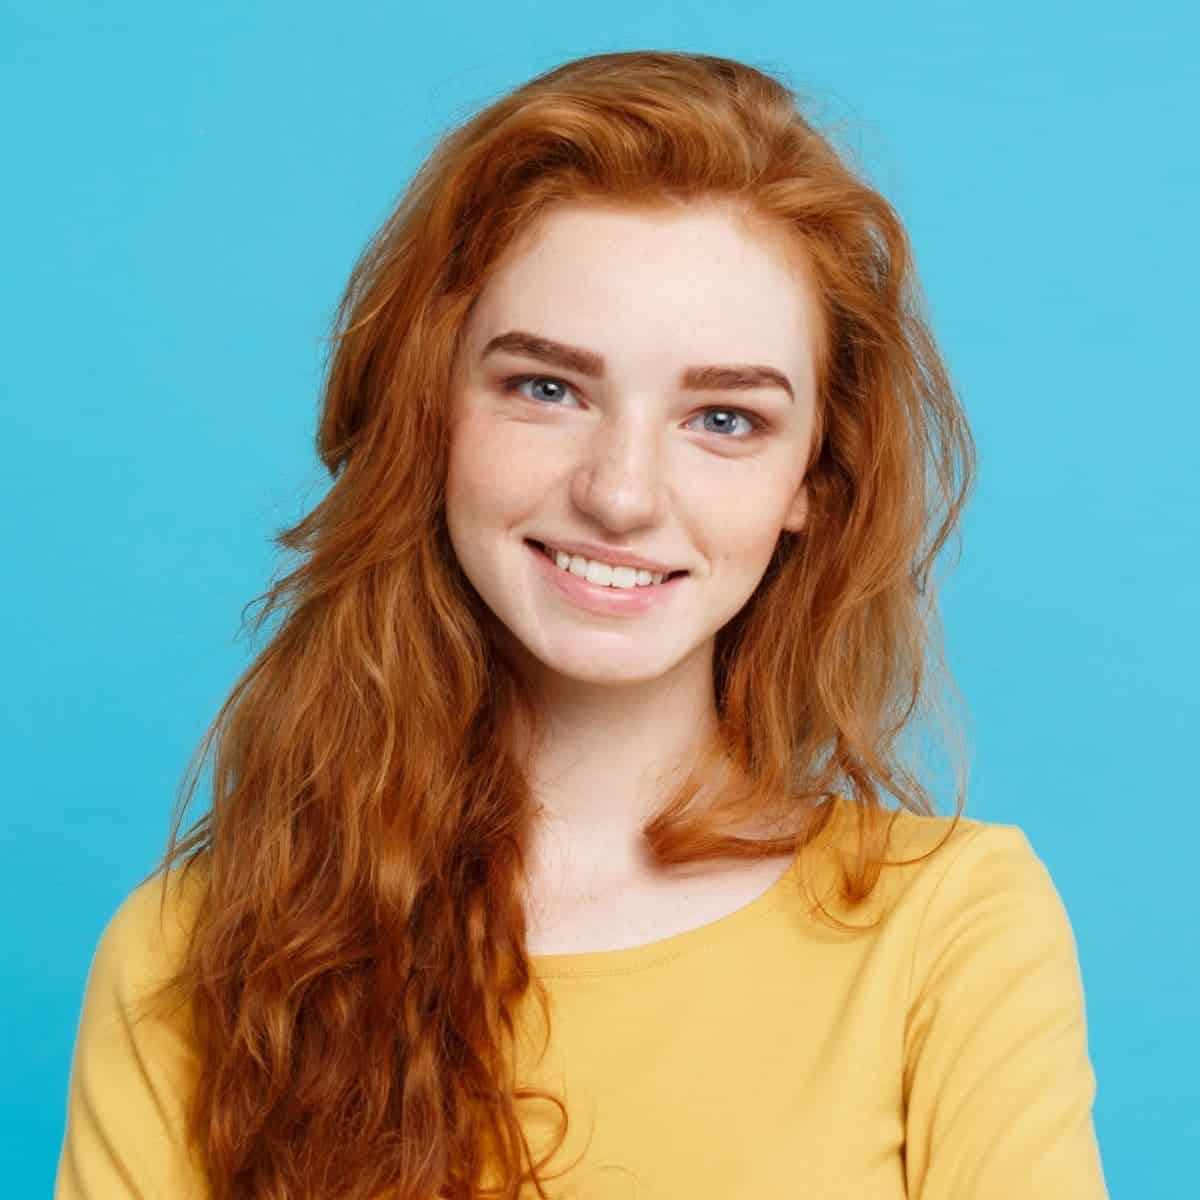 Portrait of a girl with orange hair smiling.